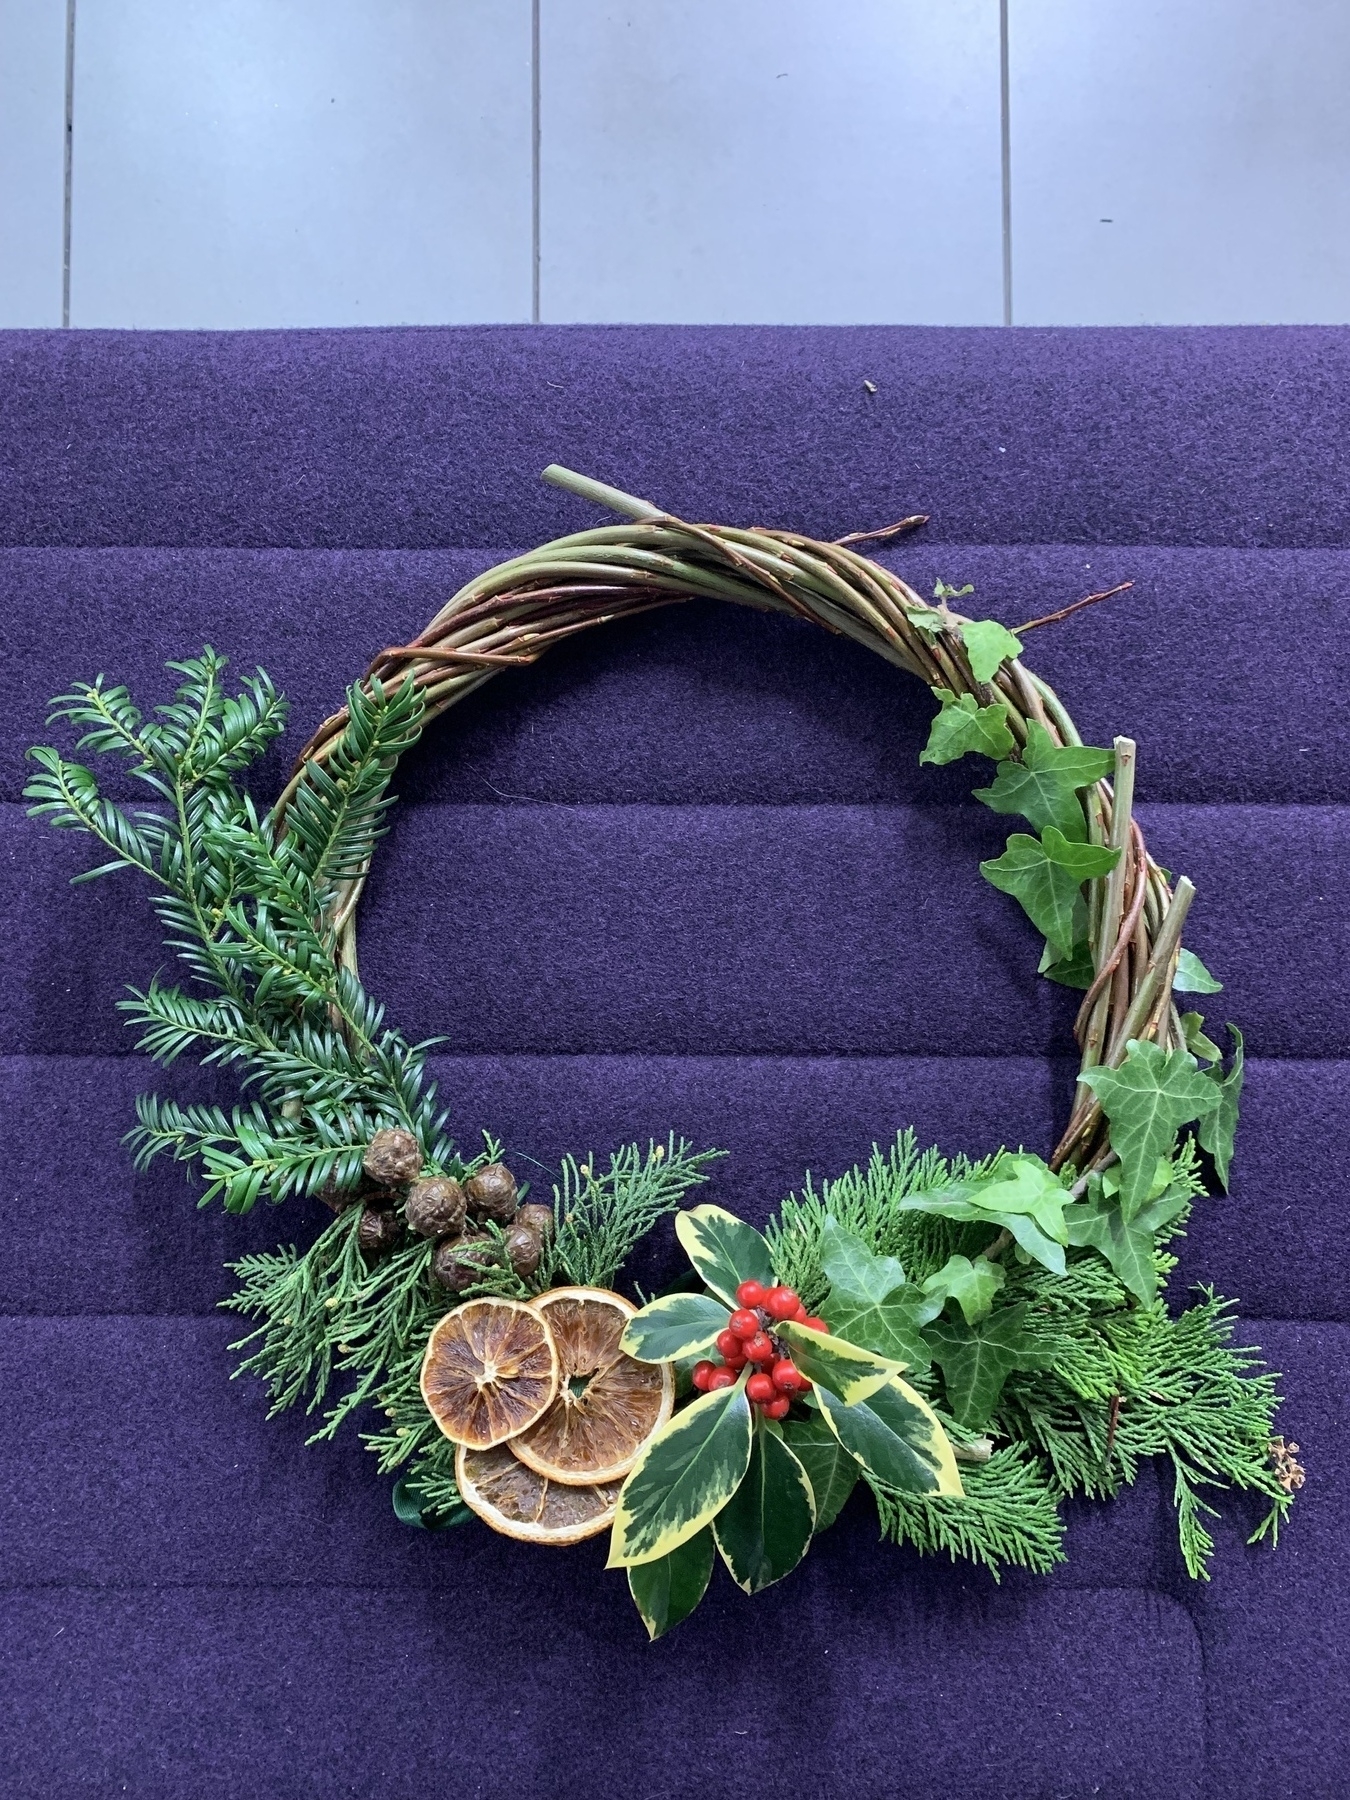 Woven willow hoop with evergreen and ivy decorations.